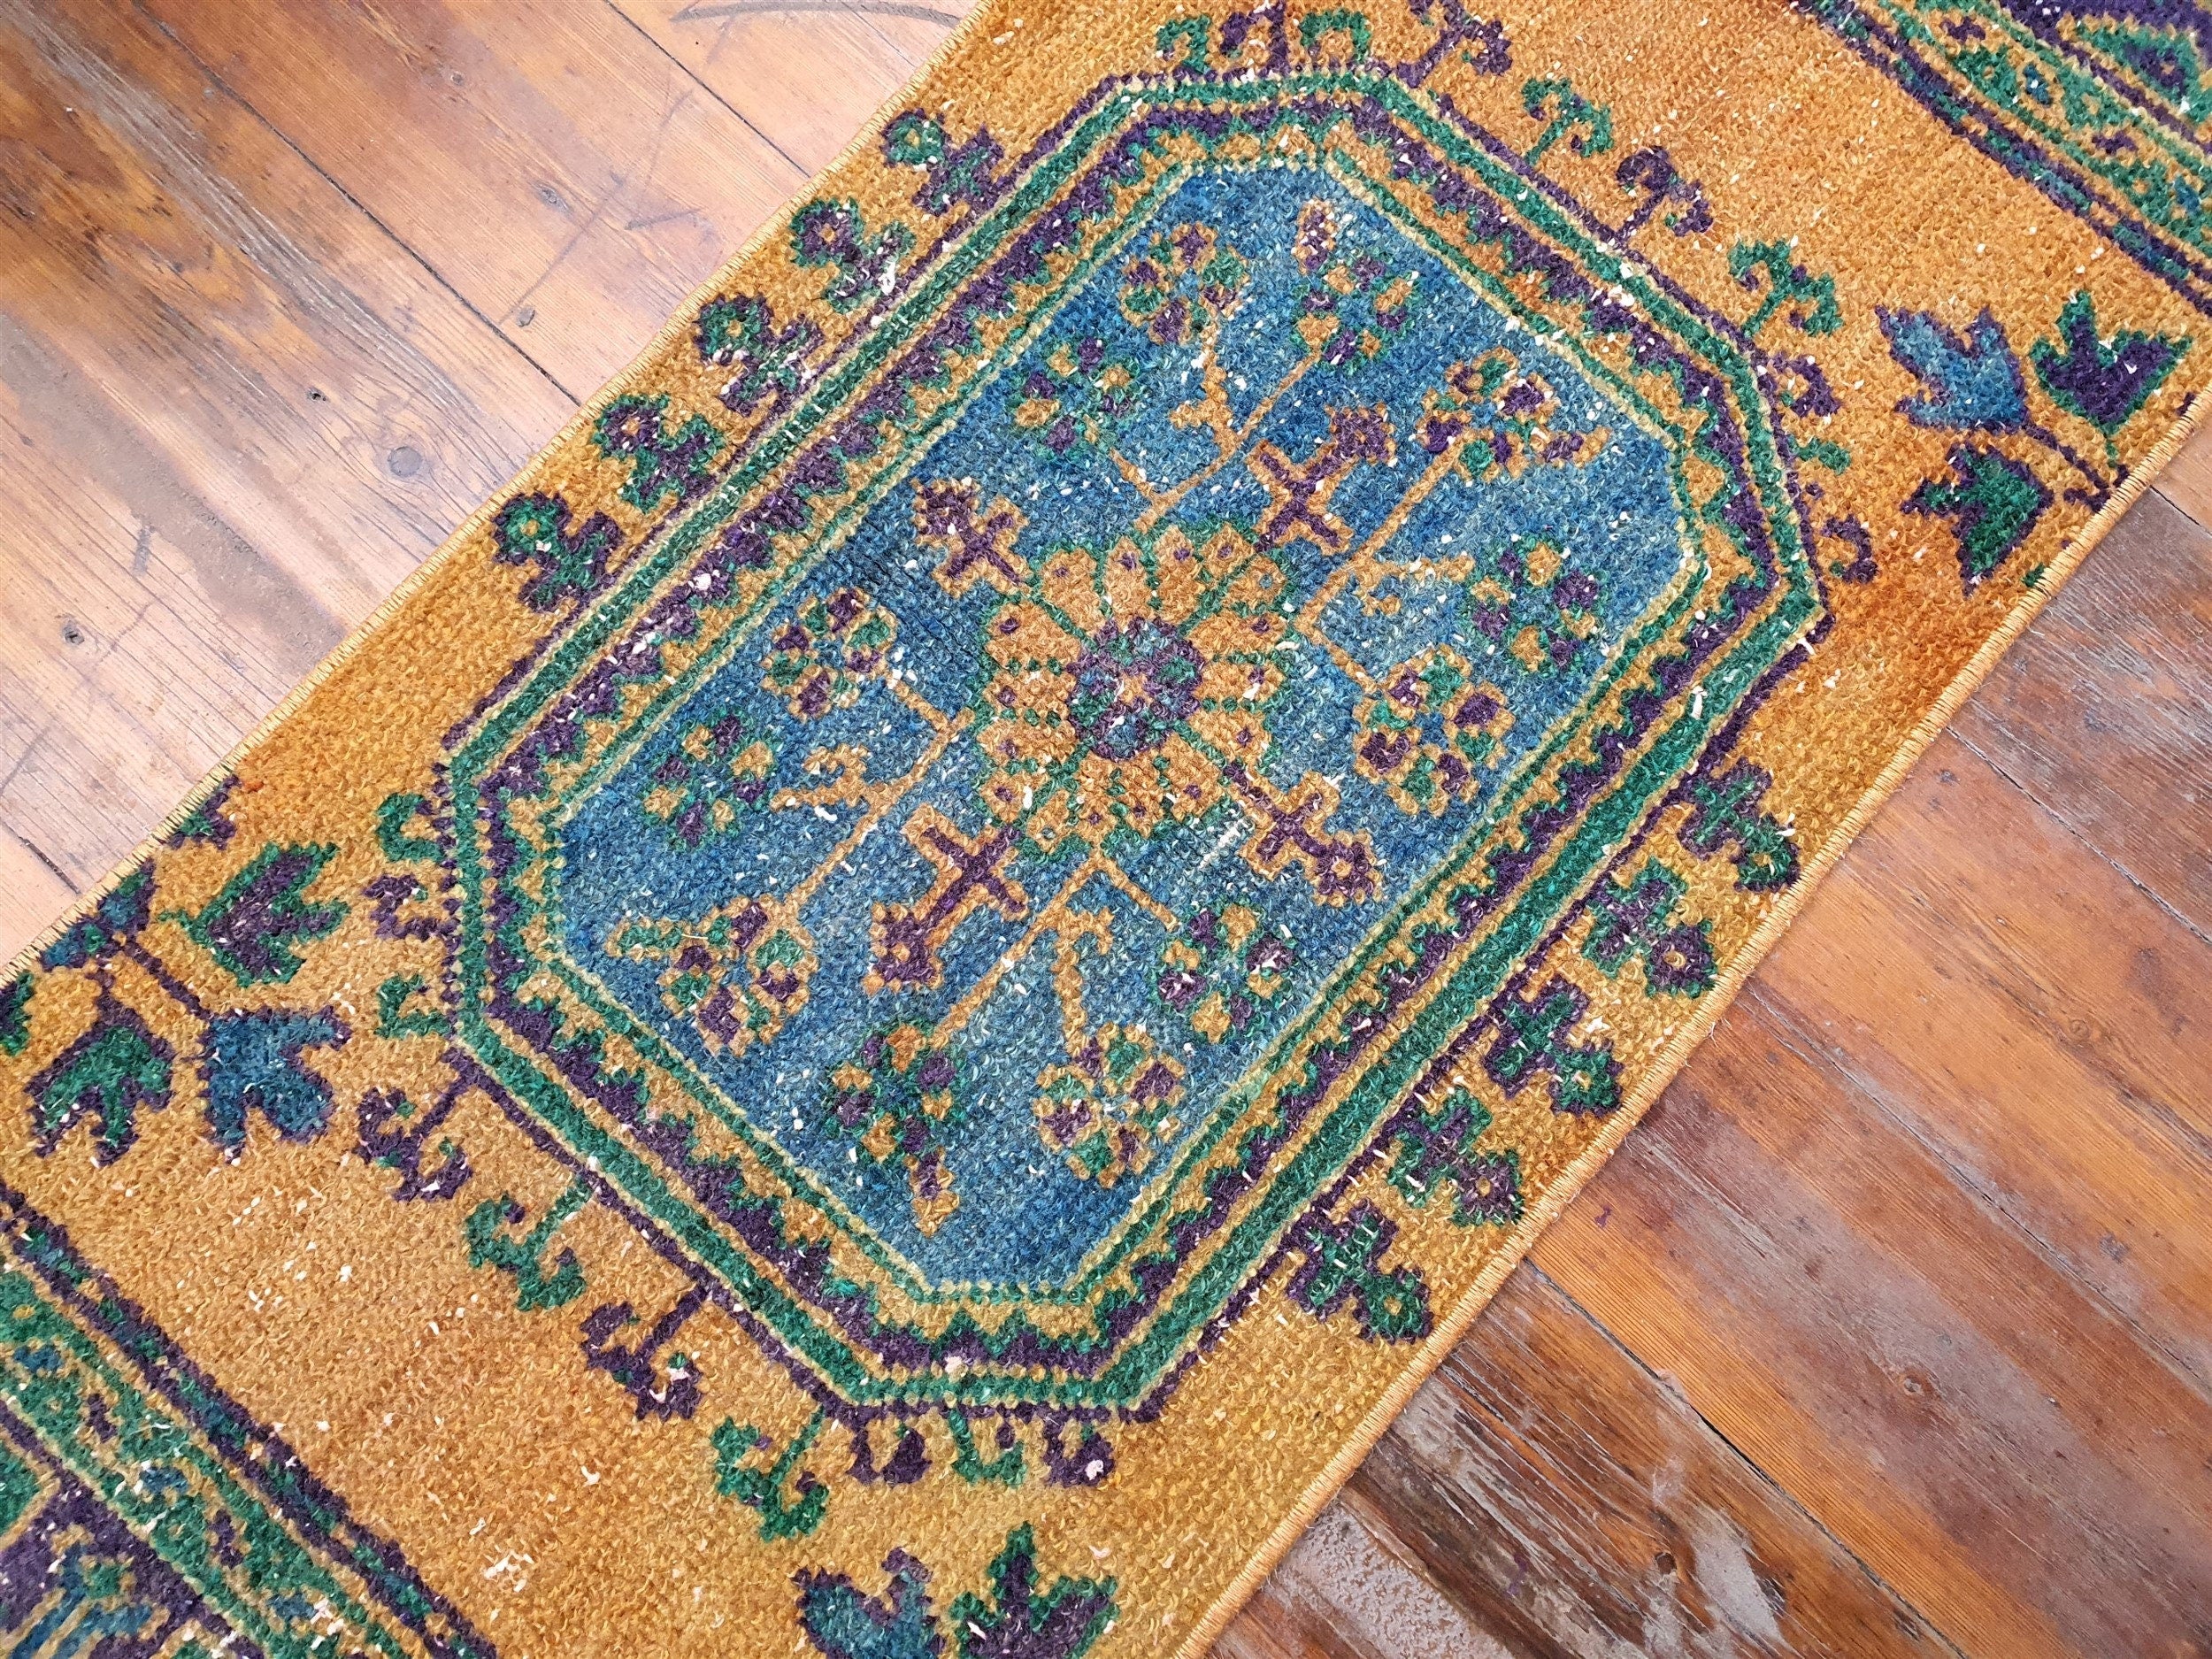 Small Turkish Rug, 4 ft 4 in x 1 ft 7 in, Apricot Orange and Teal Green / Grey Vintage Faded Distressed Door Mat